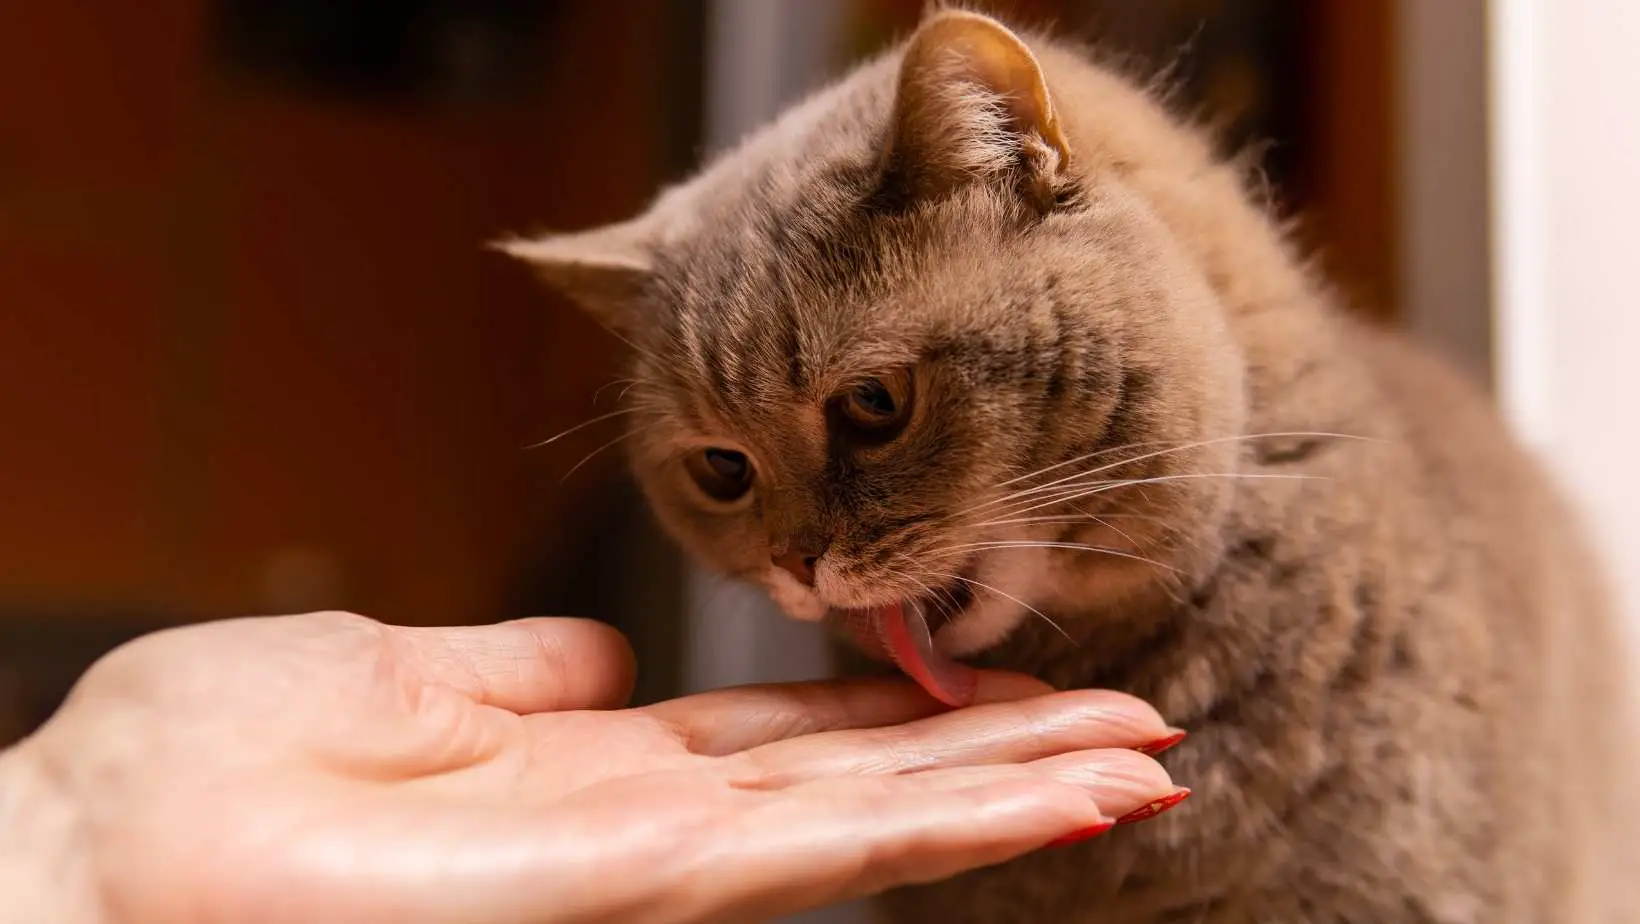 What does it mean when your cat licks you?